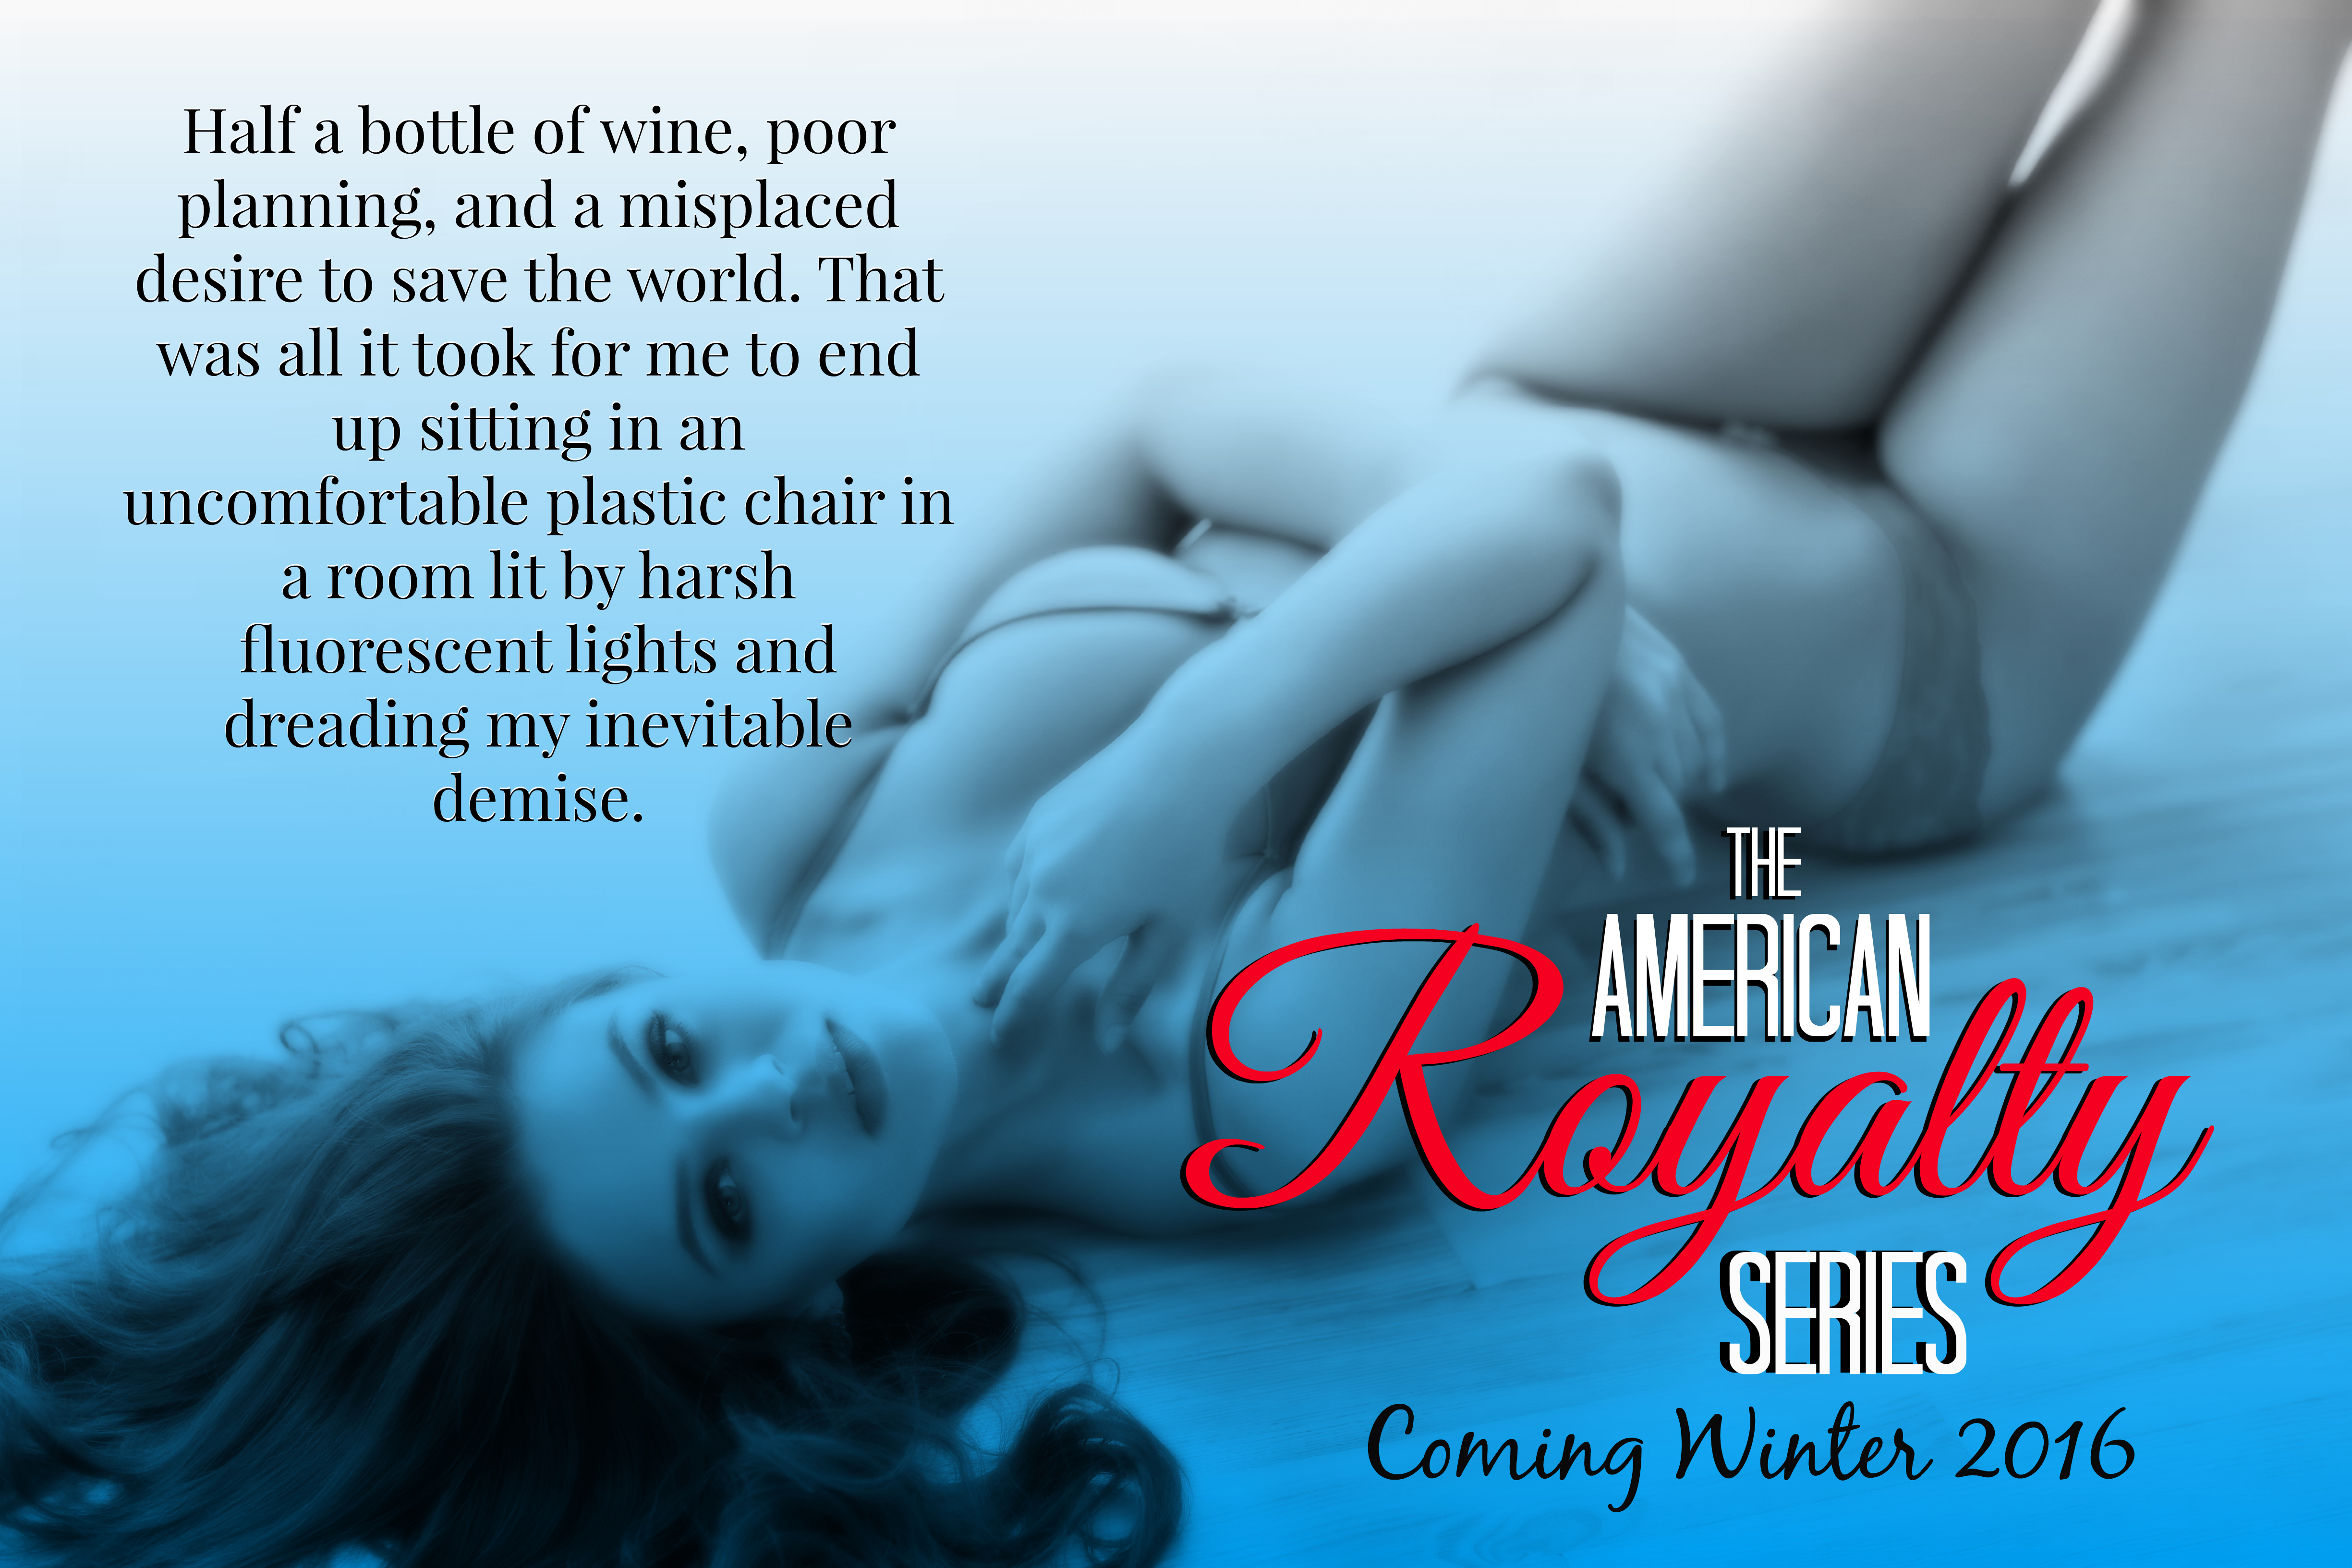 Bookish News: Coming Winter 2016 – The American Royalty Series by Nichole Case